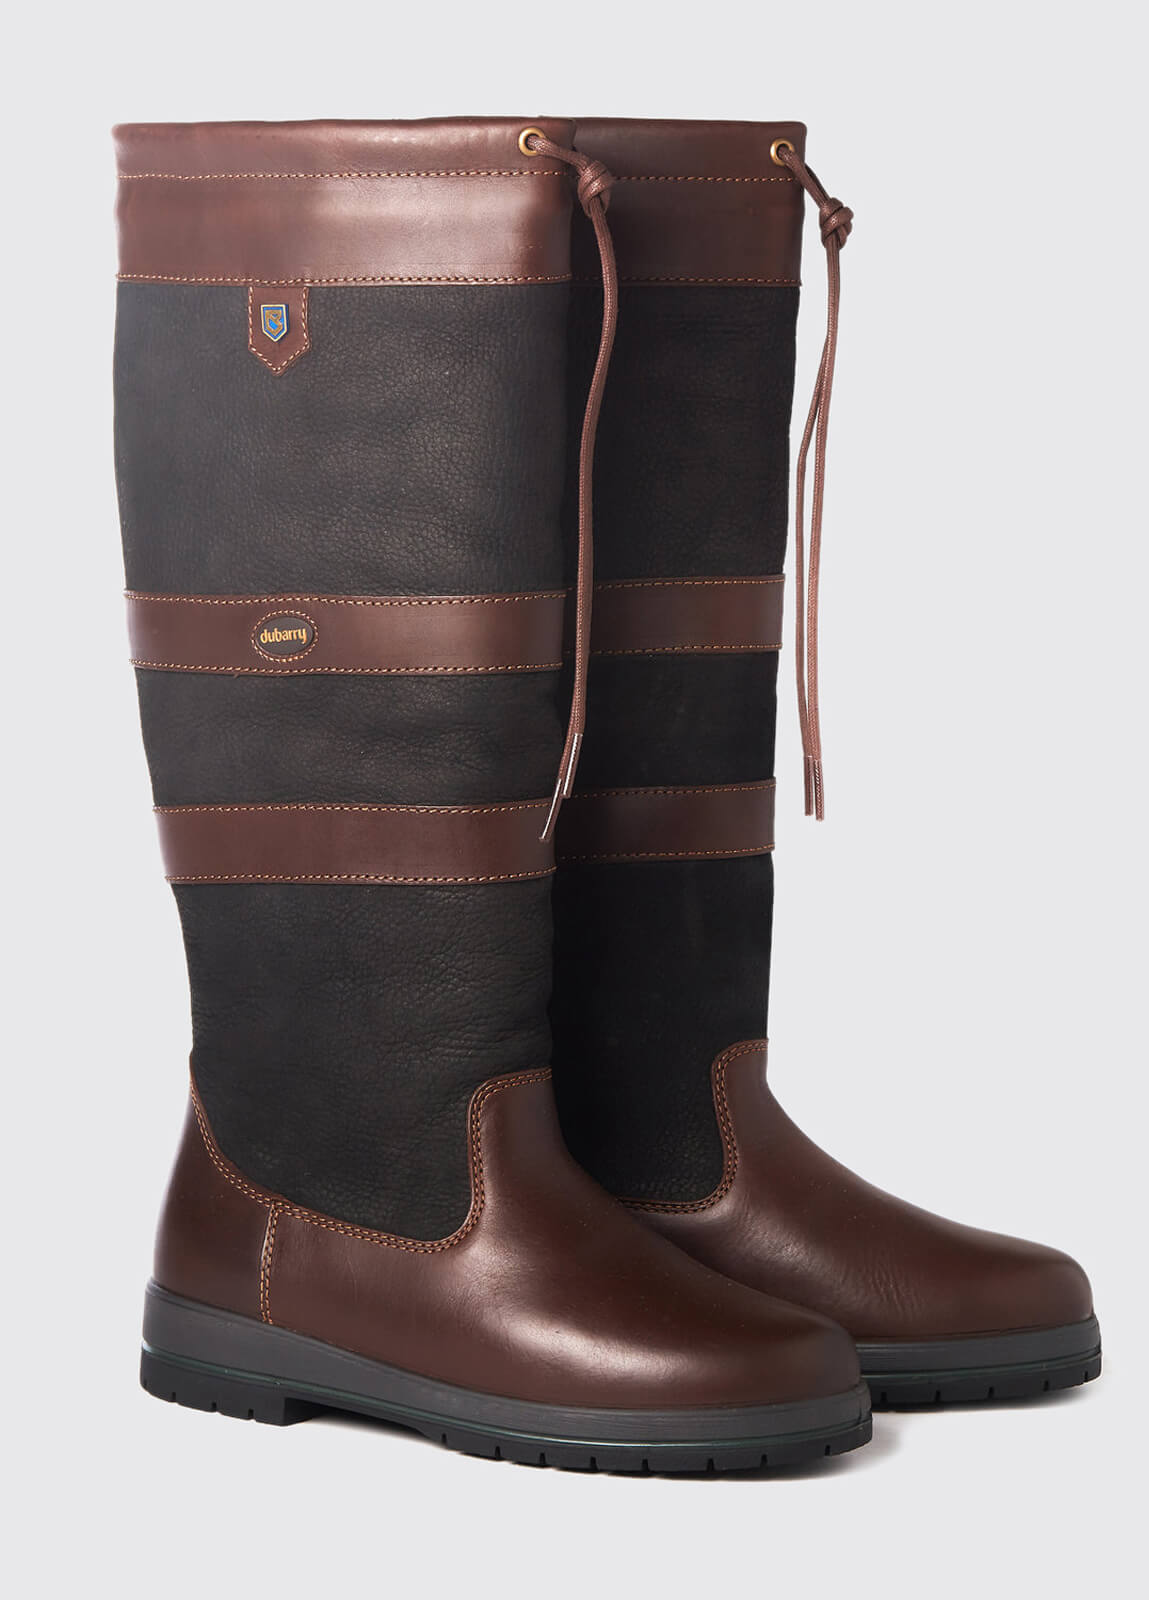 Wider calf fitting Dubarry knee-high black and brown leather Galway Country Boot with laced top